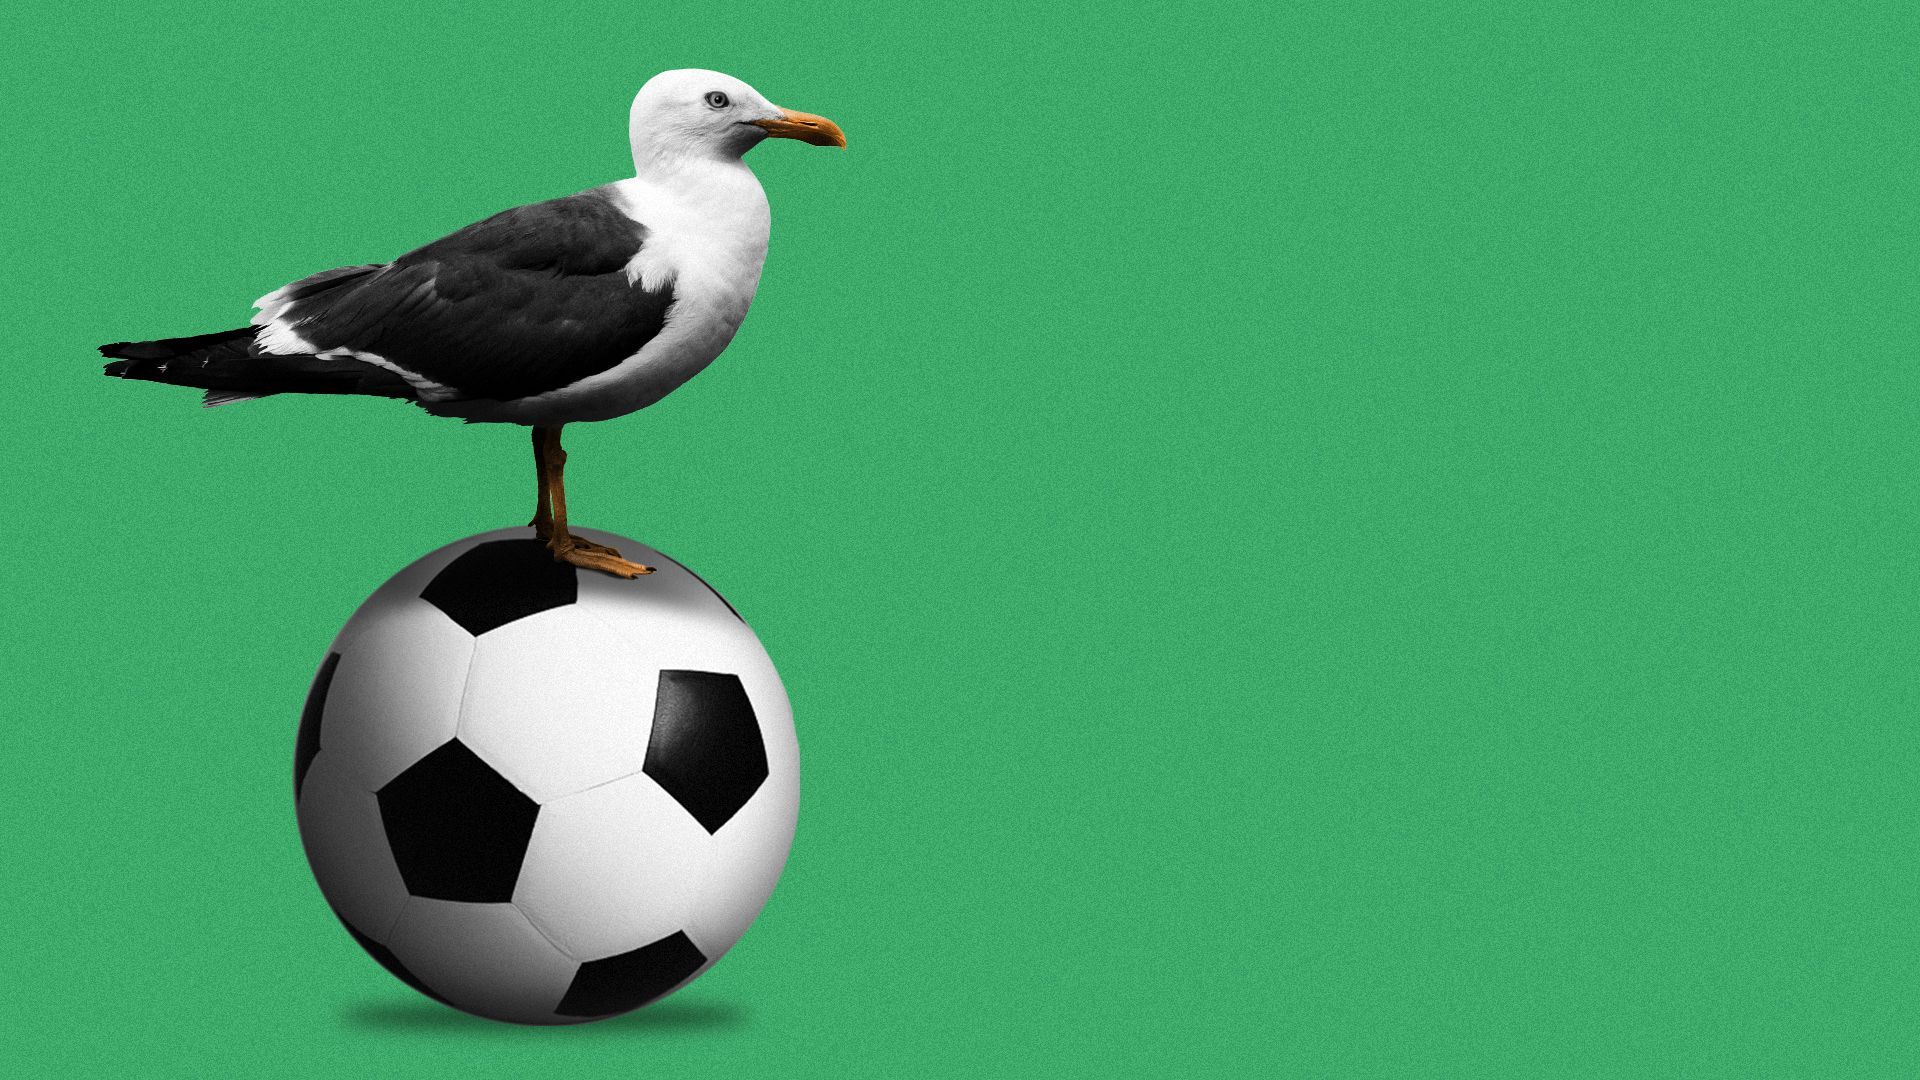 Illustration of a seagull standing on a soccer ball.